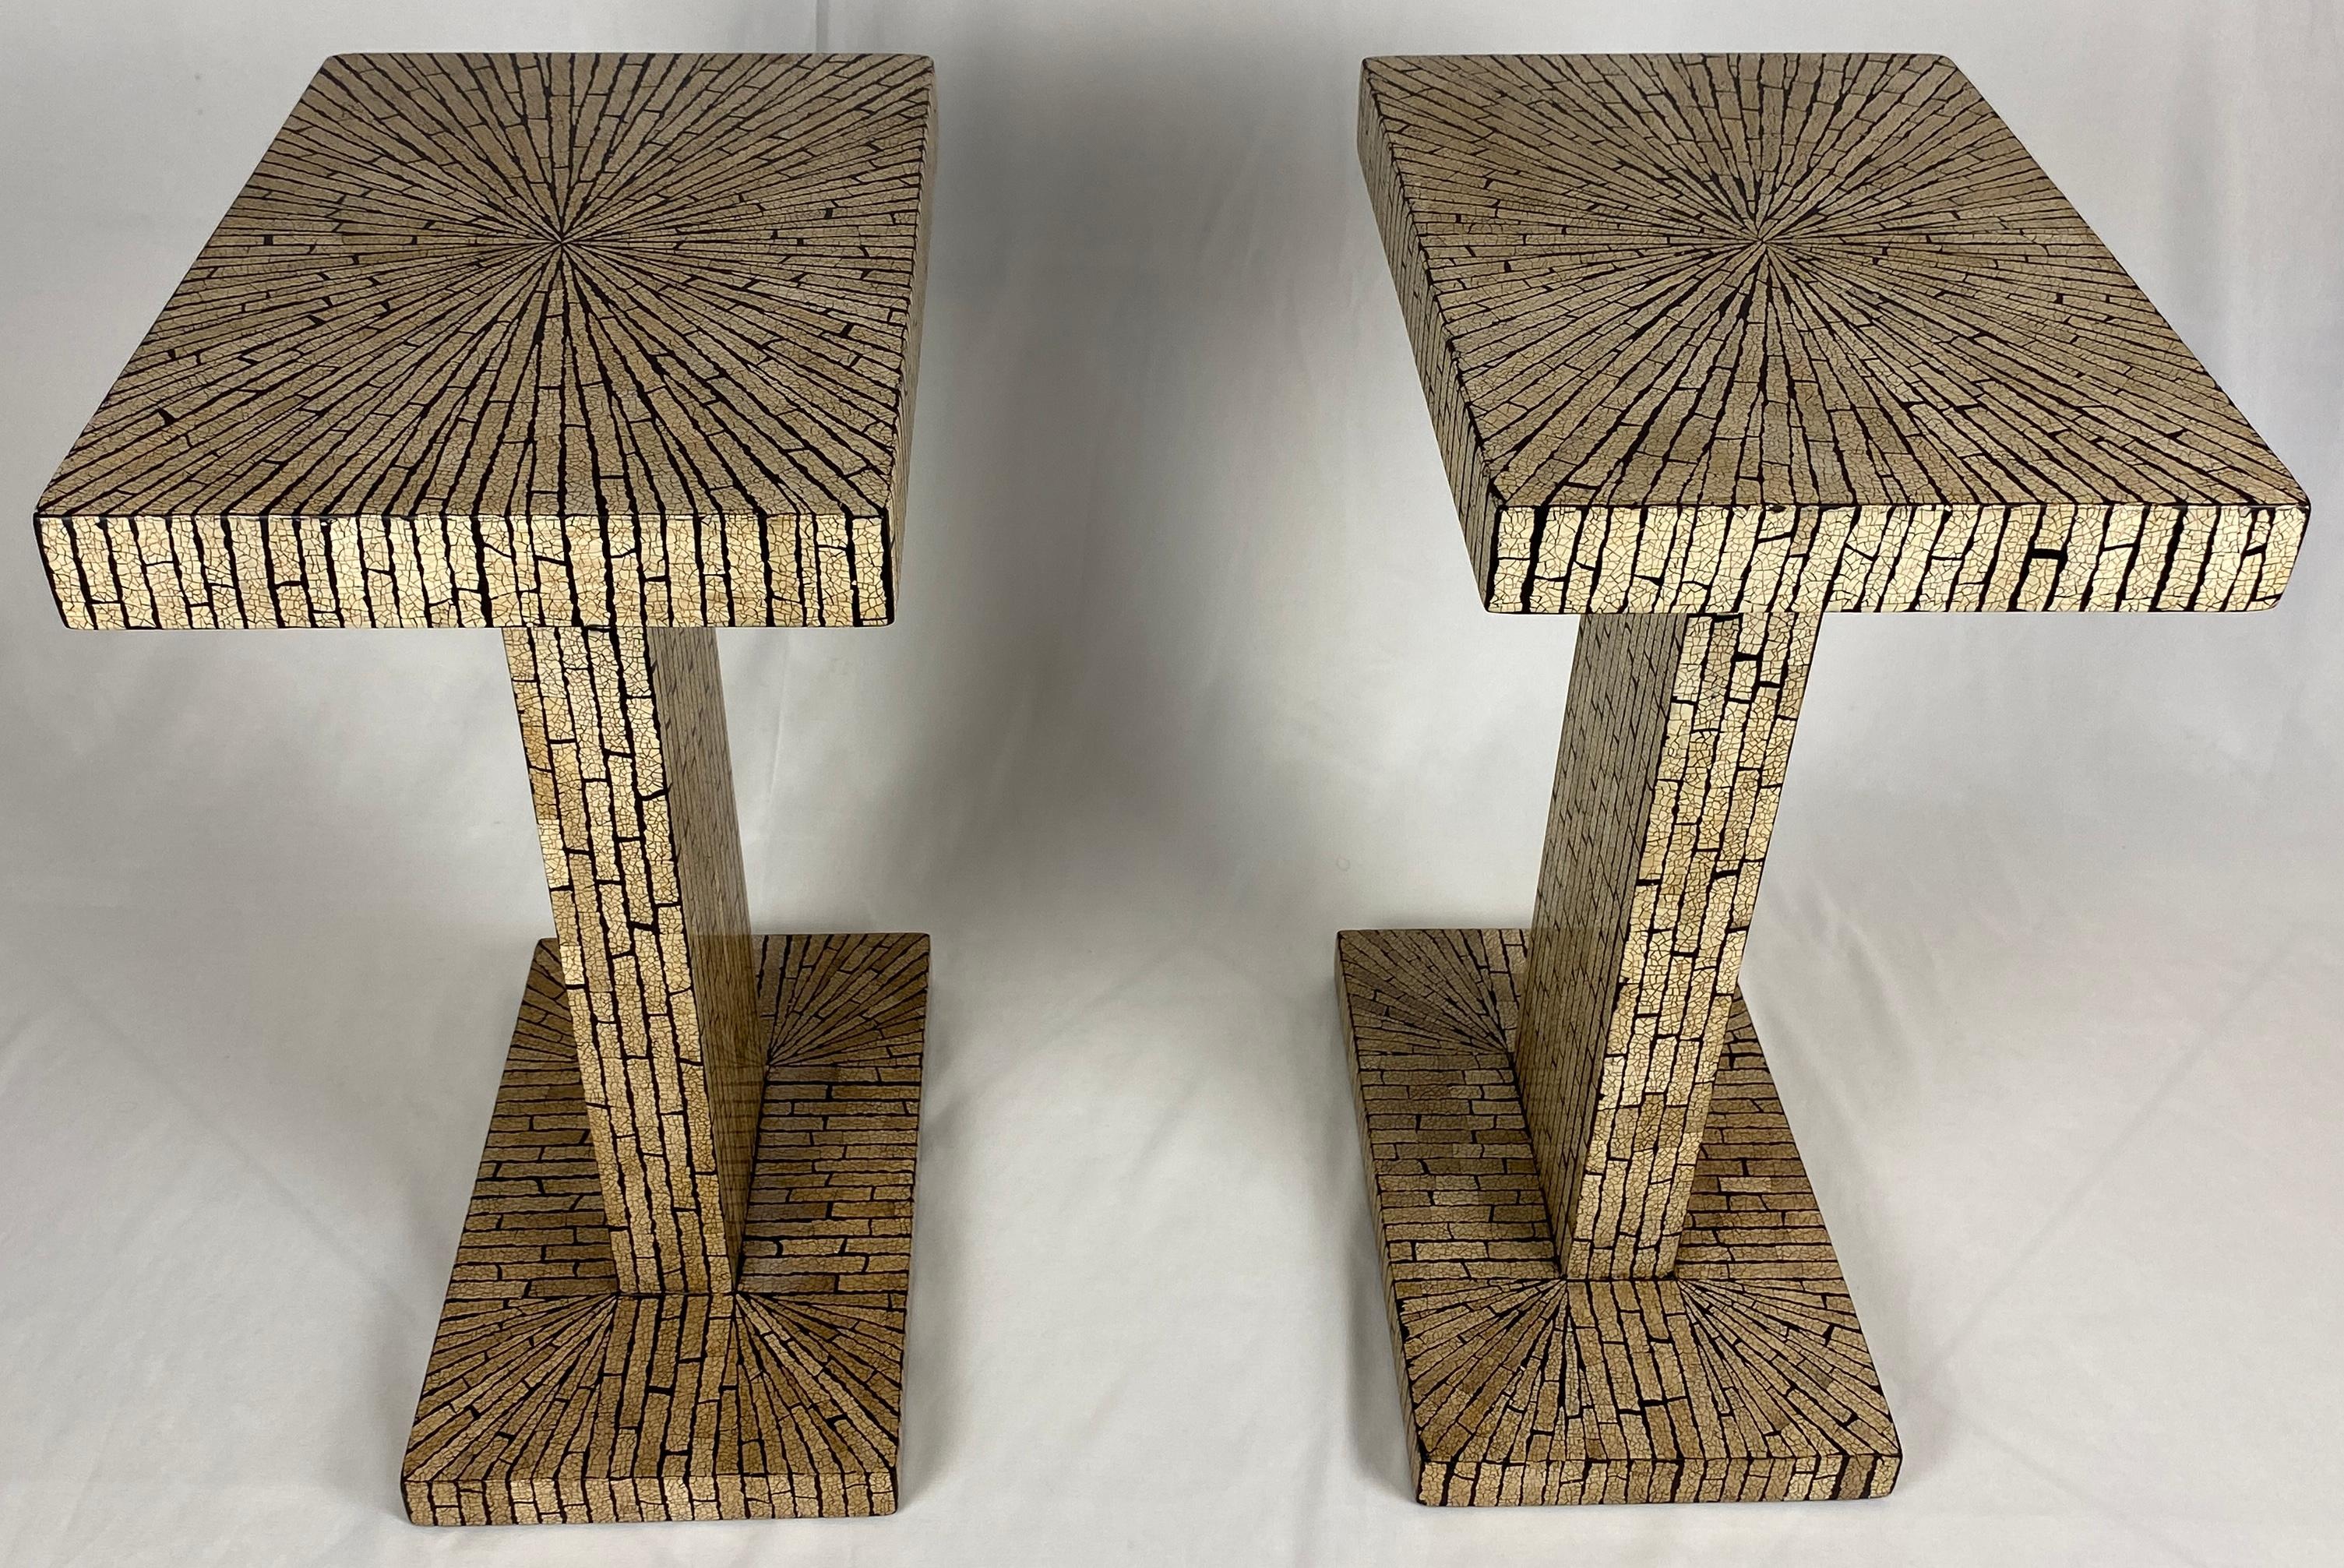 Stylish pair of elegant side tables, end tables or nightstands.
These side table or end tables would look great alongside a modern sofa or chair. 

Made of wood with marquetry inlay in the manner of Matteo Cubic designed furniture. The design is